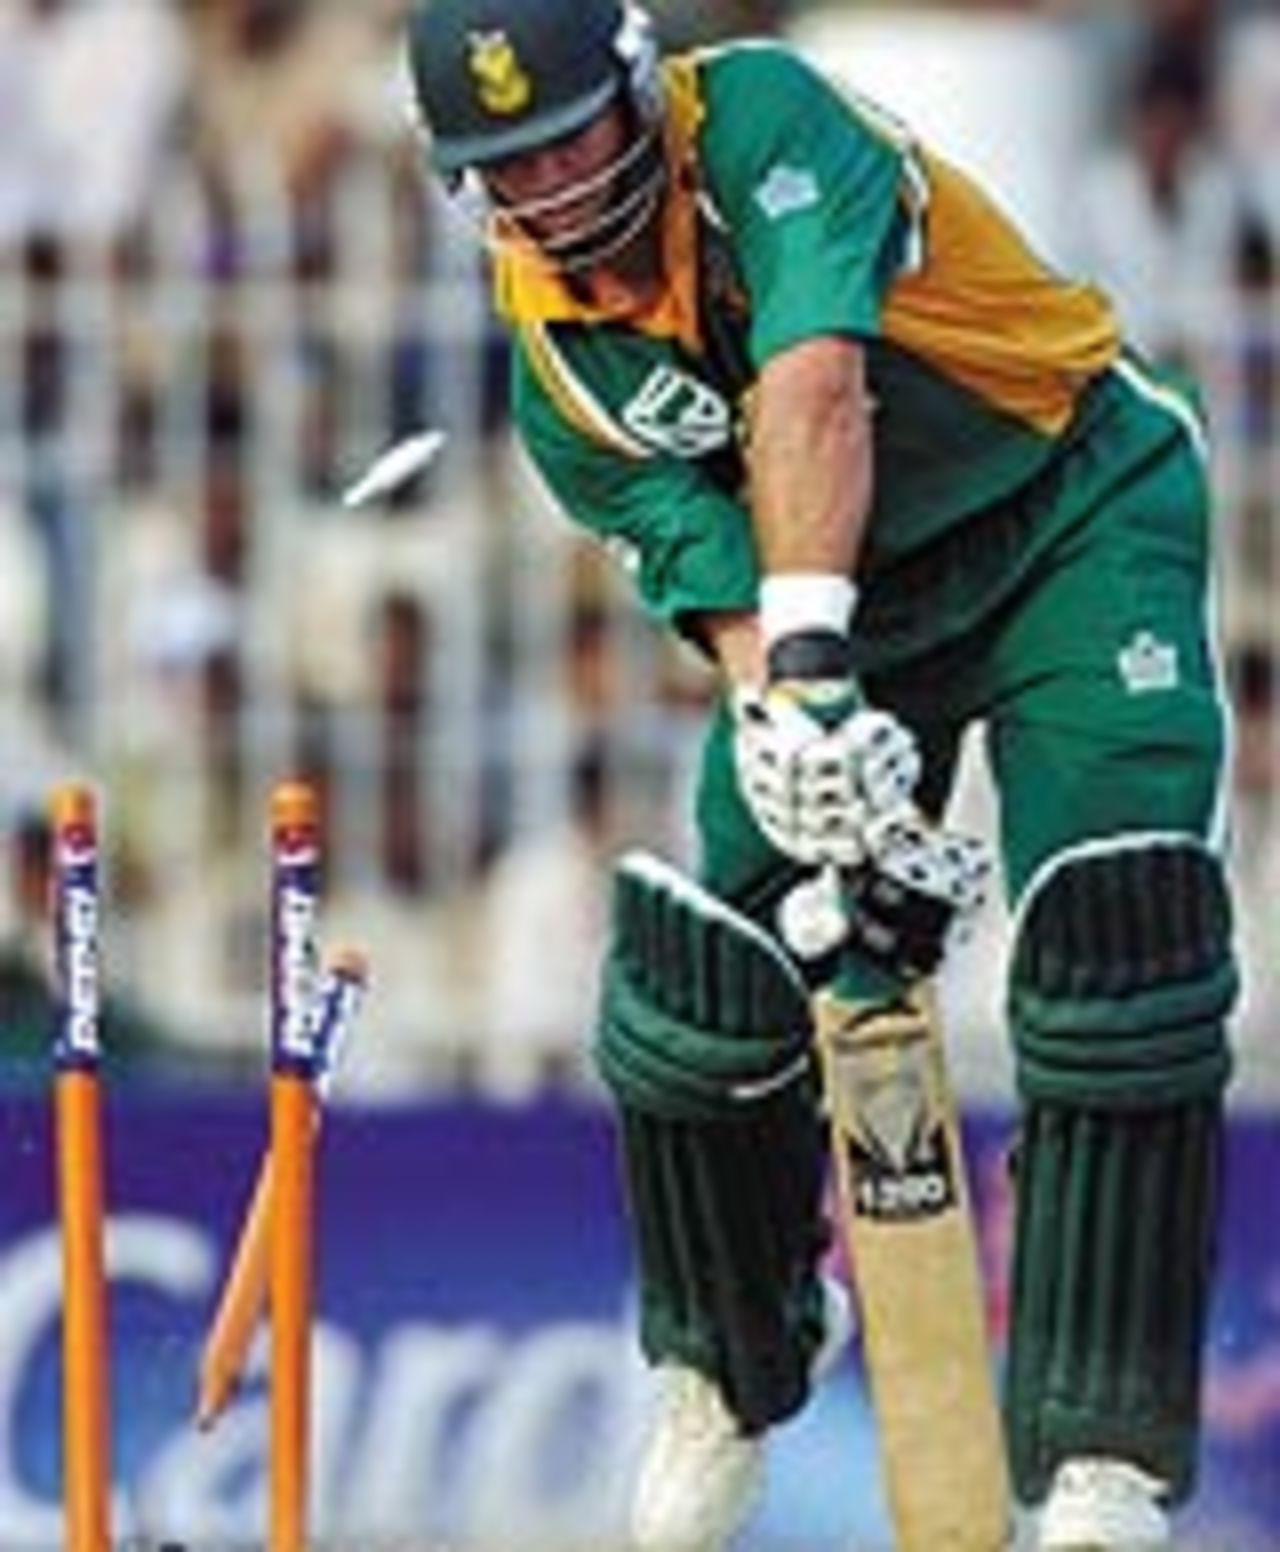 Jacques Kallis bowled by a superb yorker from Shoaib Akhtar, Pakistan v South Africa, 3rd ODI, Faisalabad, October 7, 2003